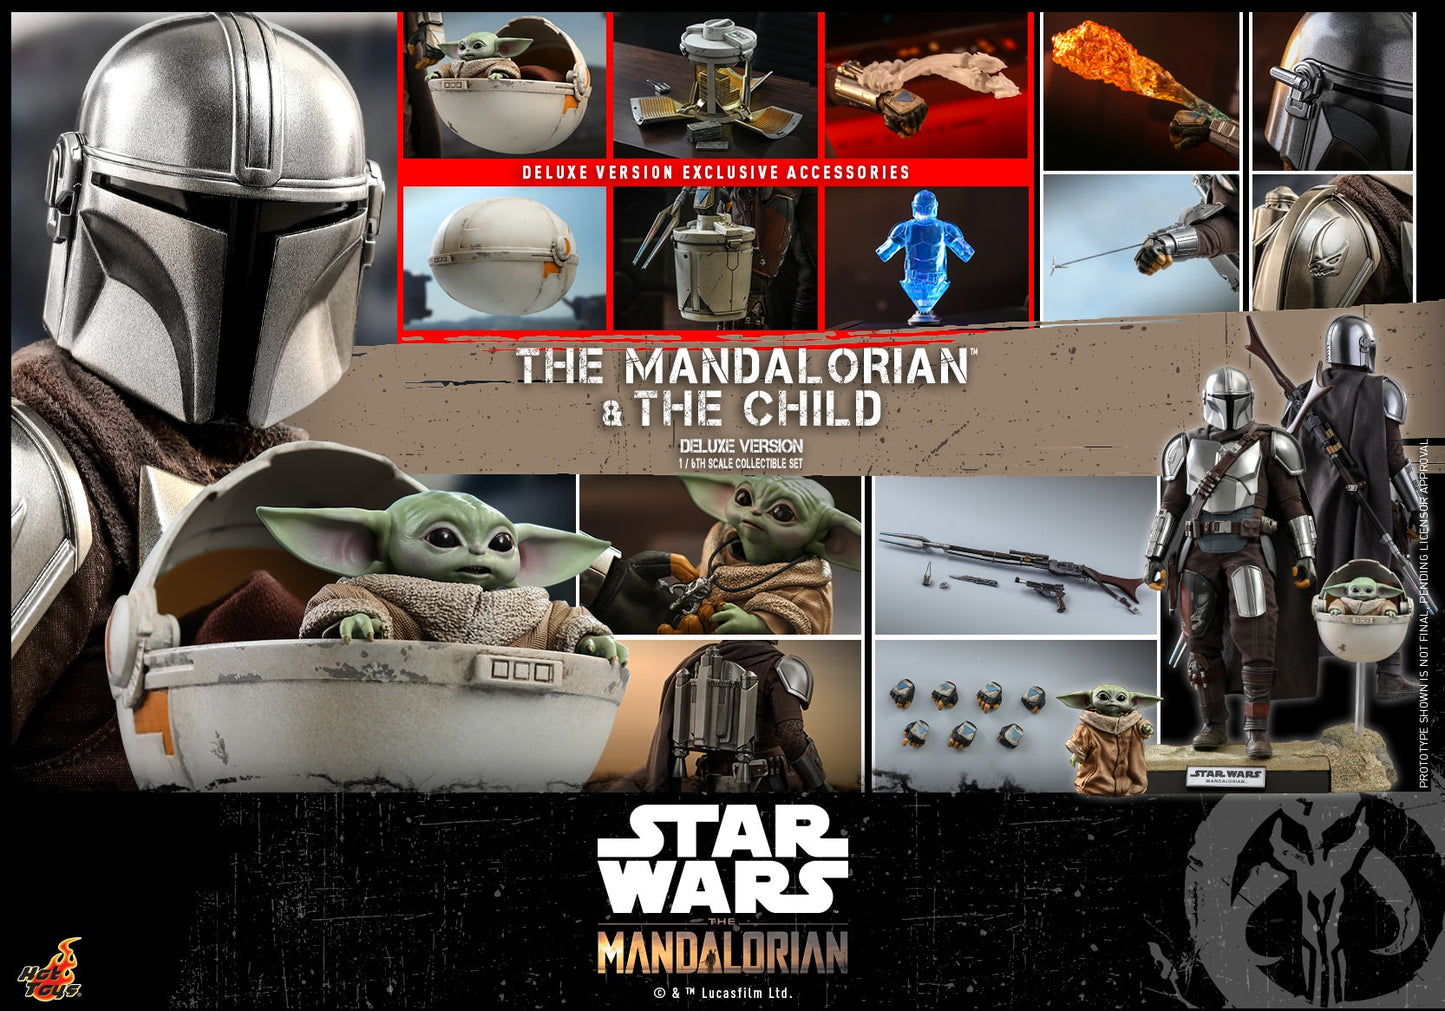 The Mandalorian & The Child Deluxe 1/6 - Star Wars: The Mandalorian Hot Toys